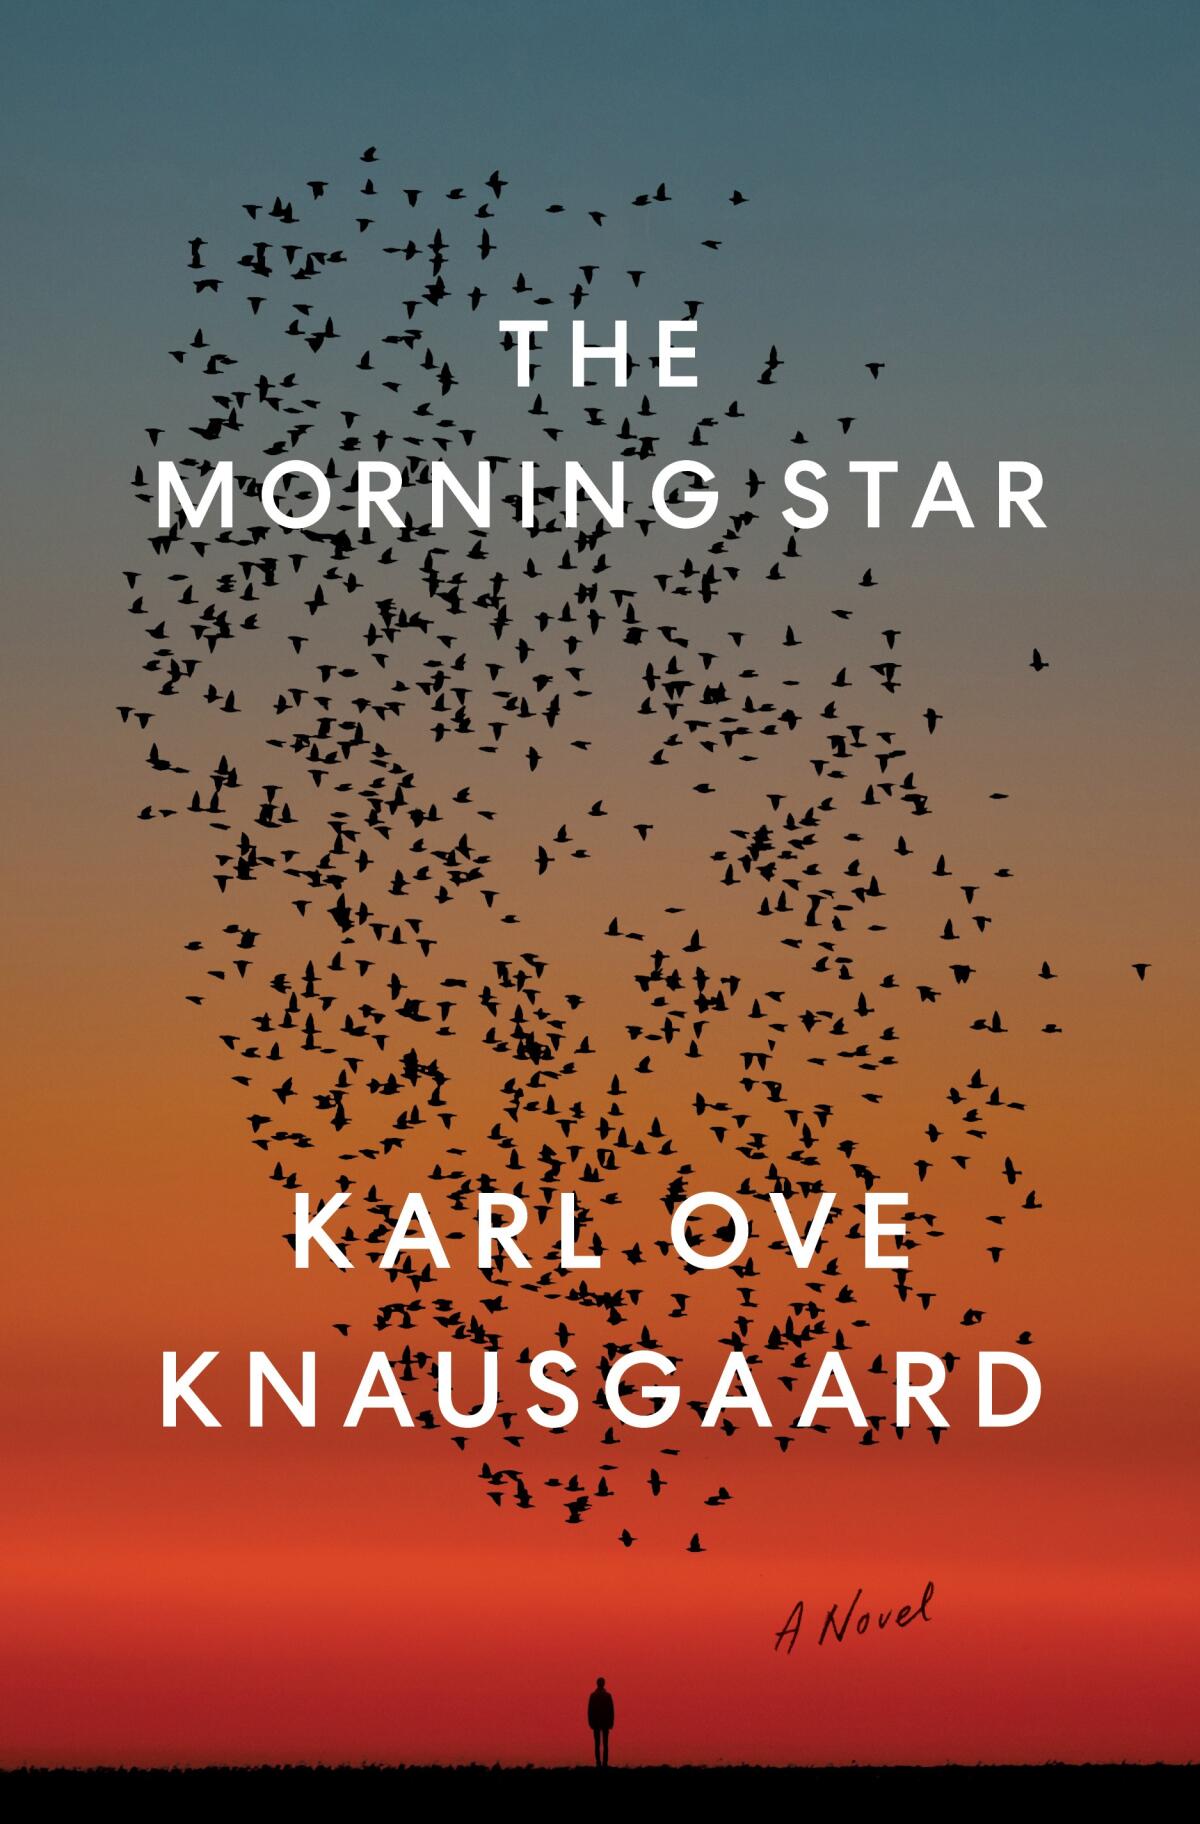 Book cover for "The Morning Star" by Karl Ove Knausgaard